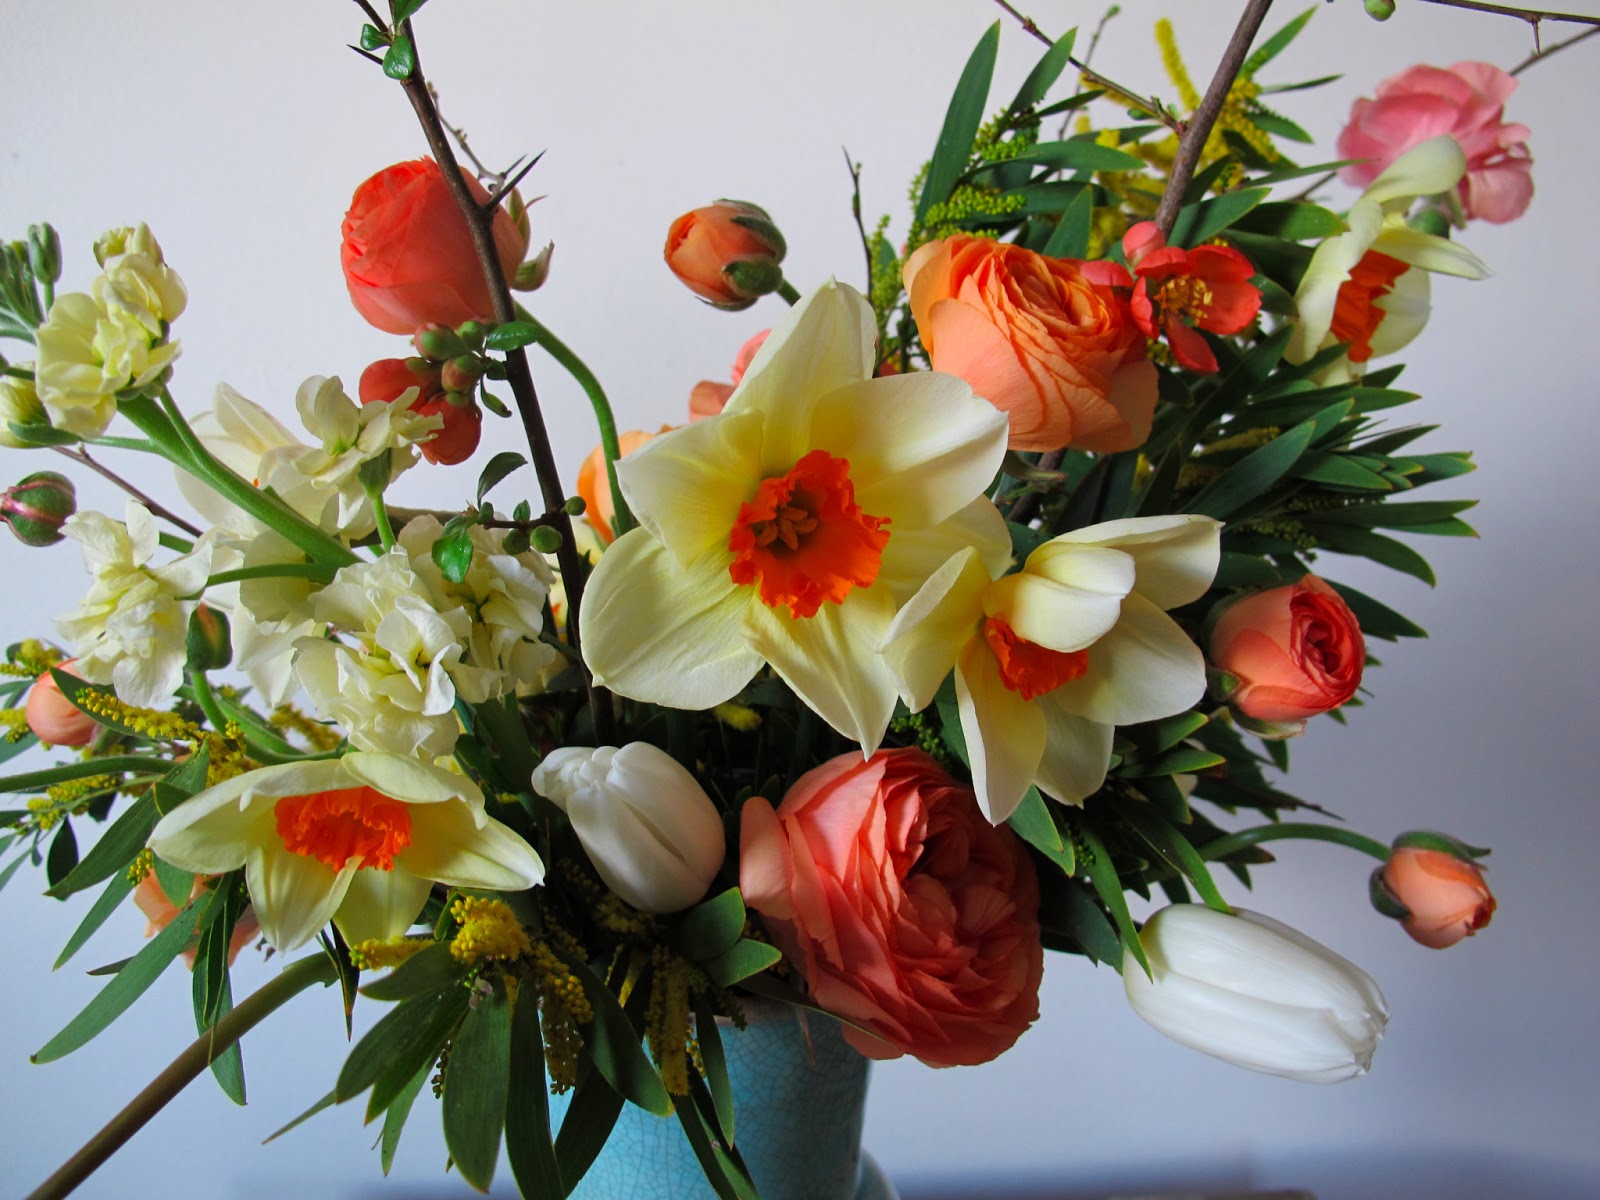 6. "Gelaze in "Spring Bouquet" for a vibrant and floral spring color - wide 9